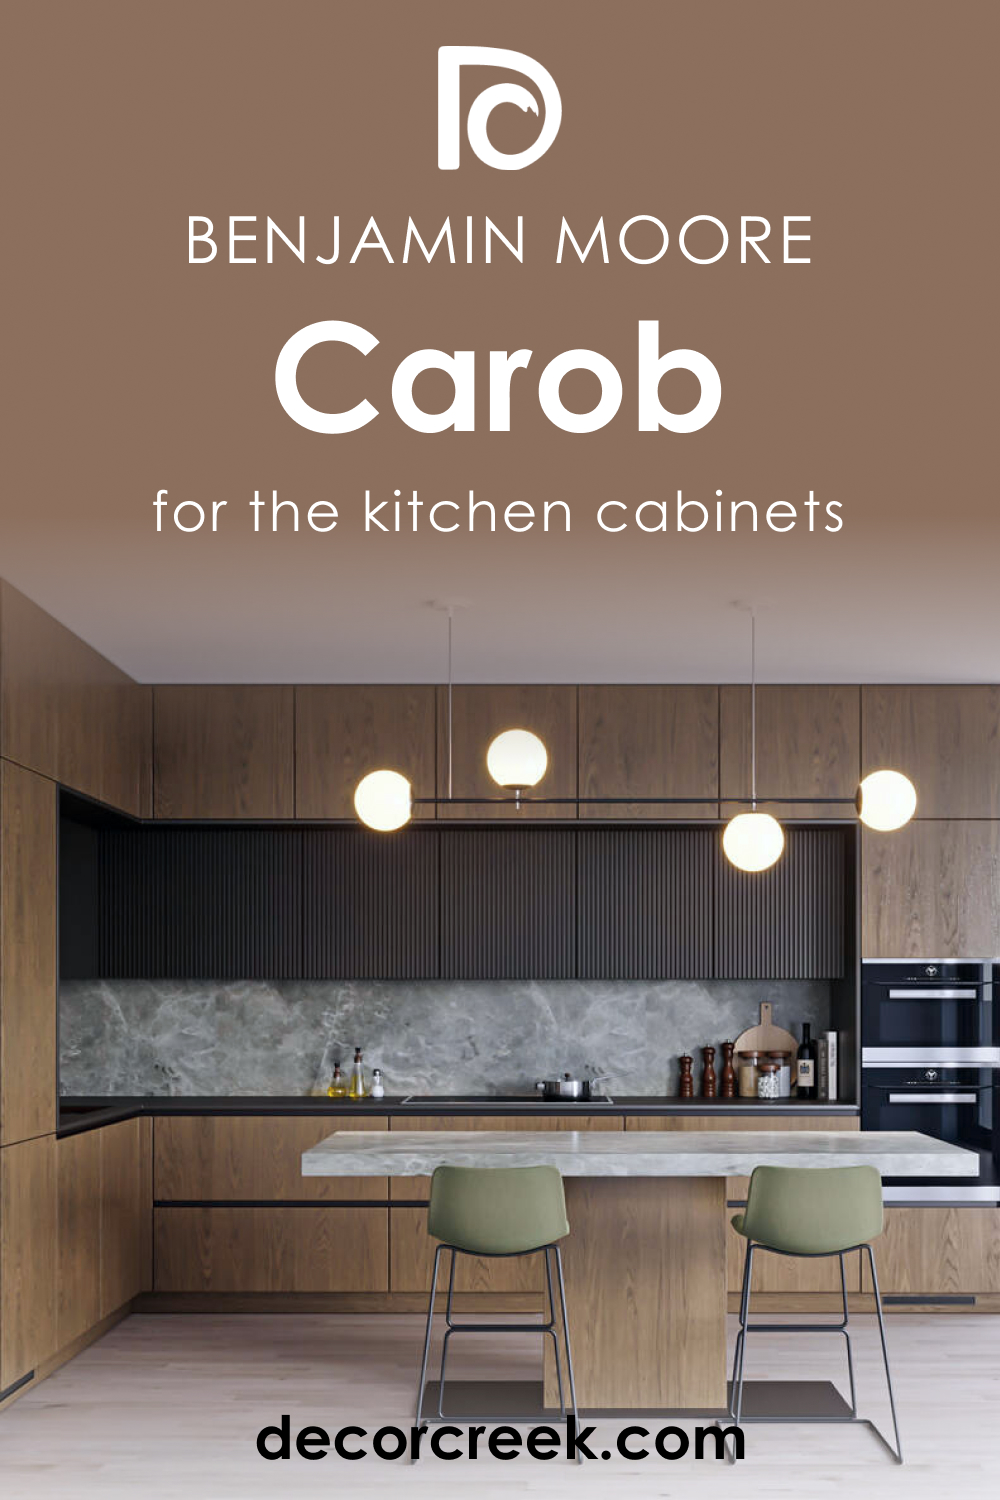 How to Use Carob AF-160 on the Kitchen Cabinets?